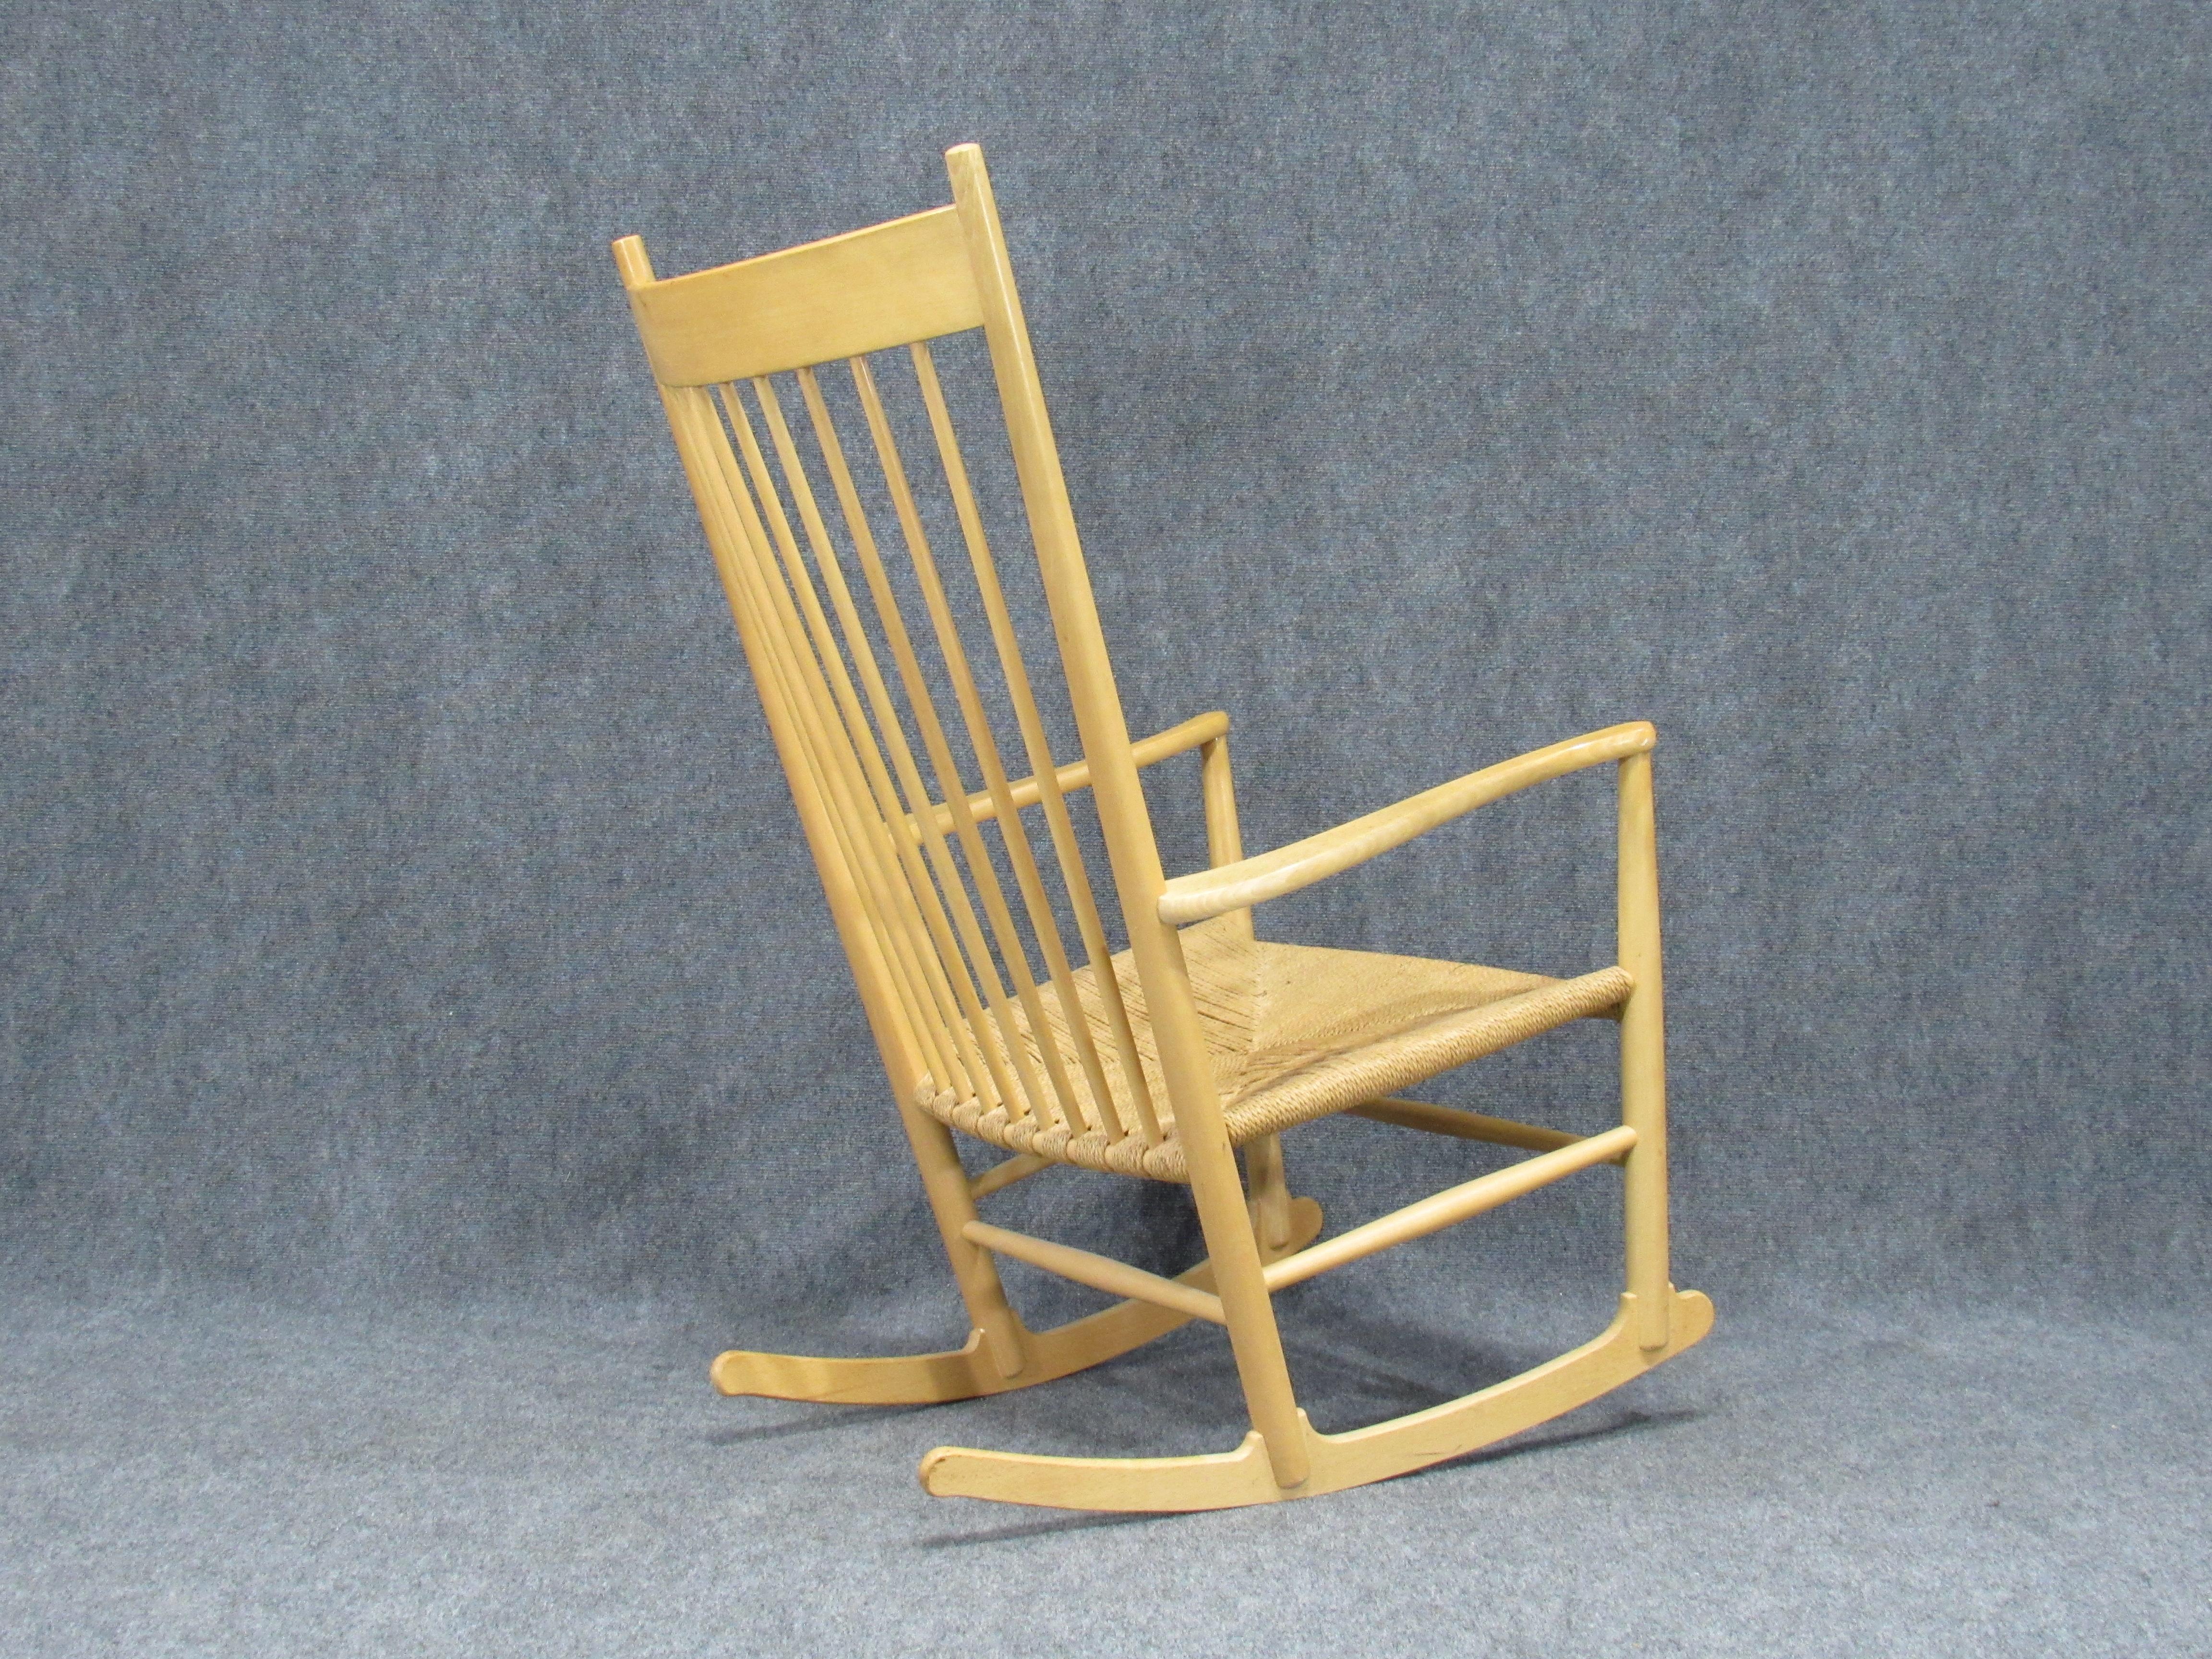 This spindle-backed model J16 rocking chair J16 was designed by Hans Wegner in 1944 and manufactured by Mobler F.D.B. Denmark. The beech frame and 3-ply hemp cord seat seating is in a very excellent vintage condition. The Scandinavian Modern